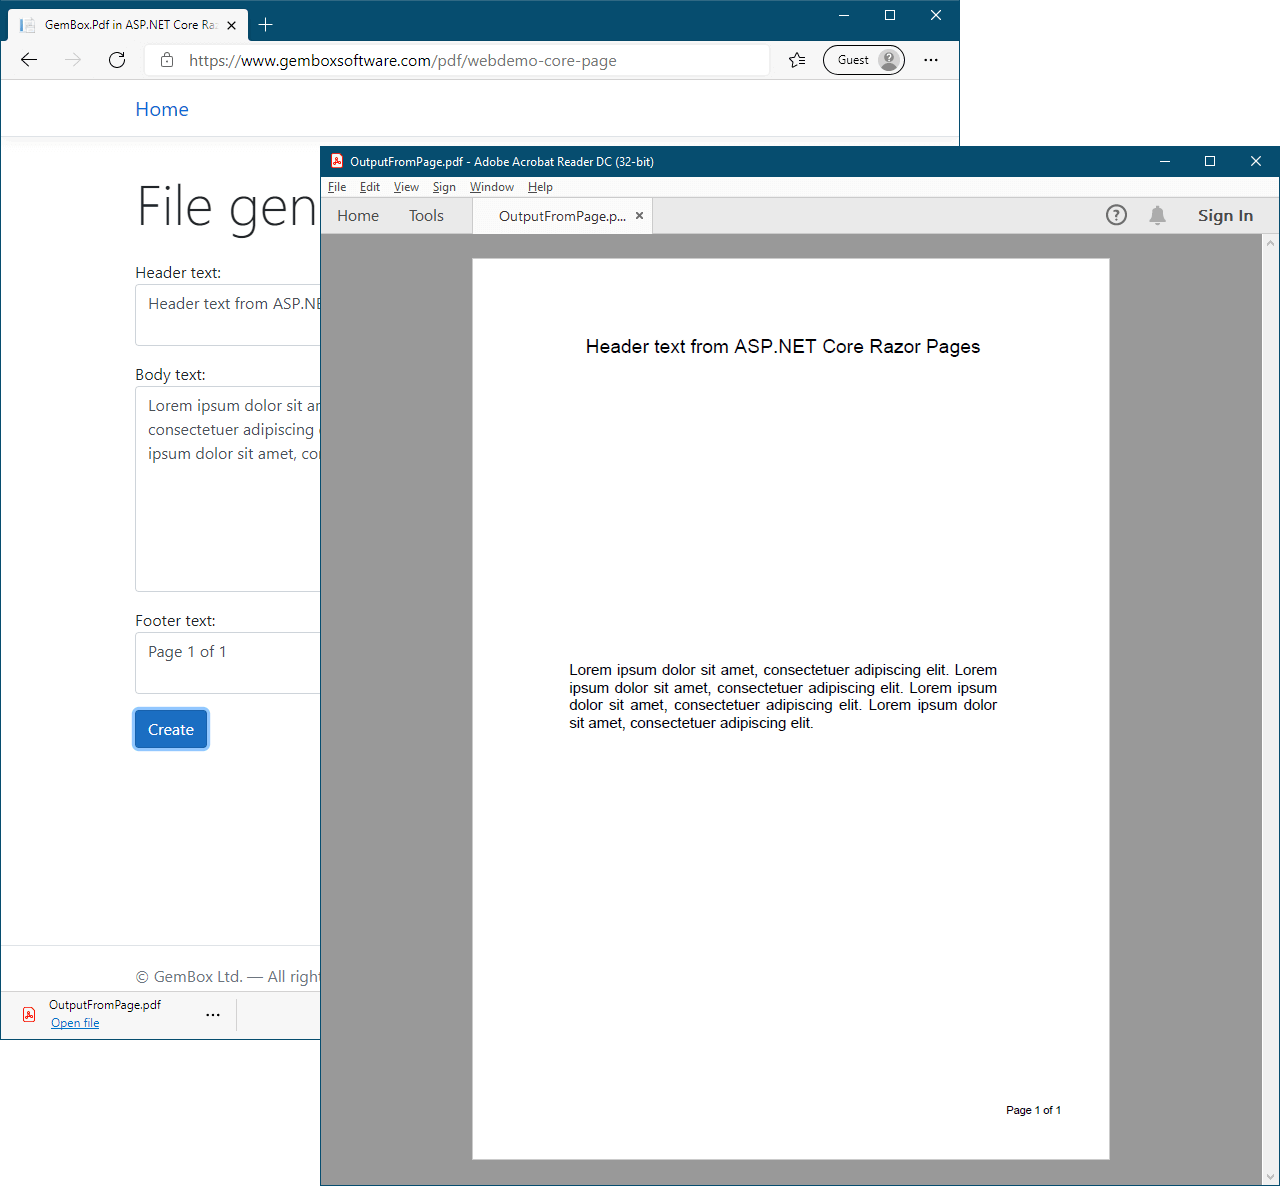 Sending form data from Razor page and generating PDF file in ASP.NET Core Razor Pages application